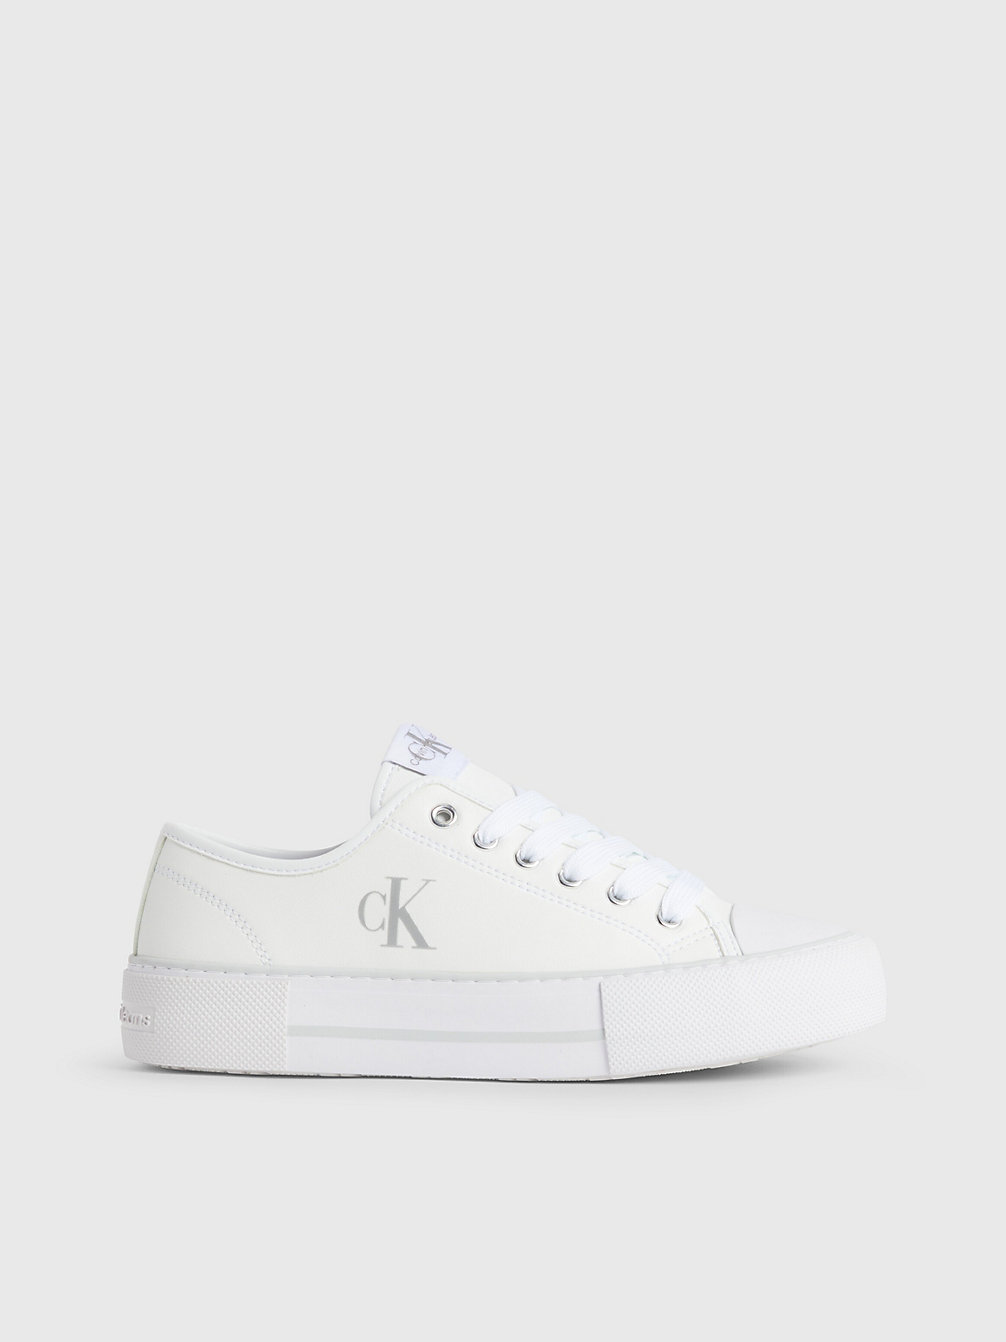 WHITE > Gerecycled Plateausneakers Voor Kdis > undefined girls - Calvin Klein